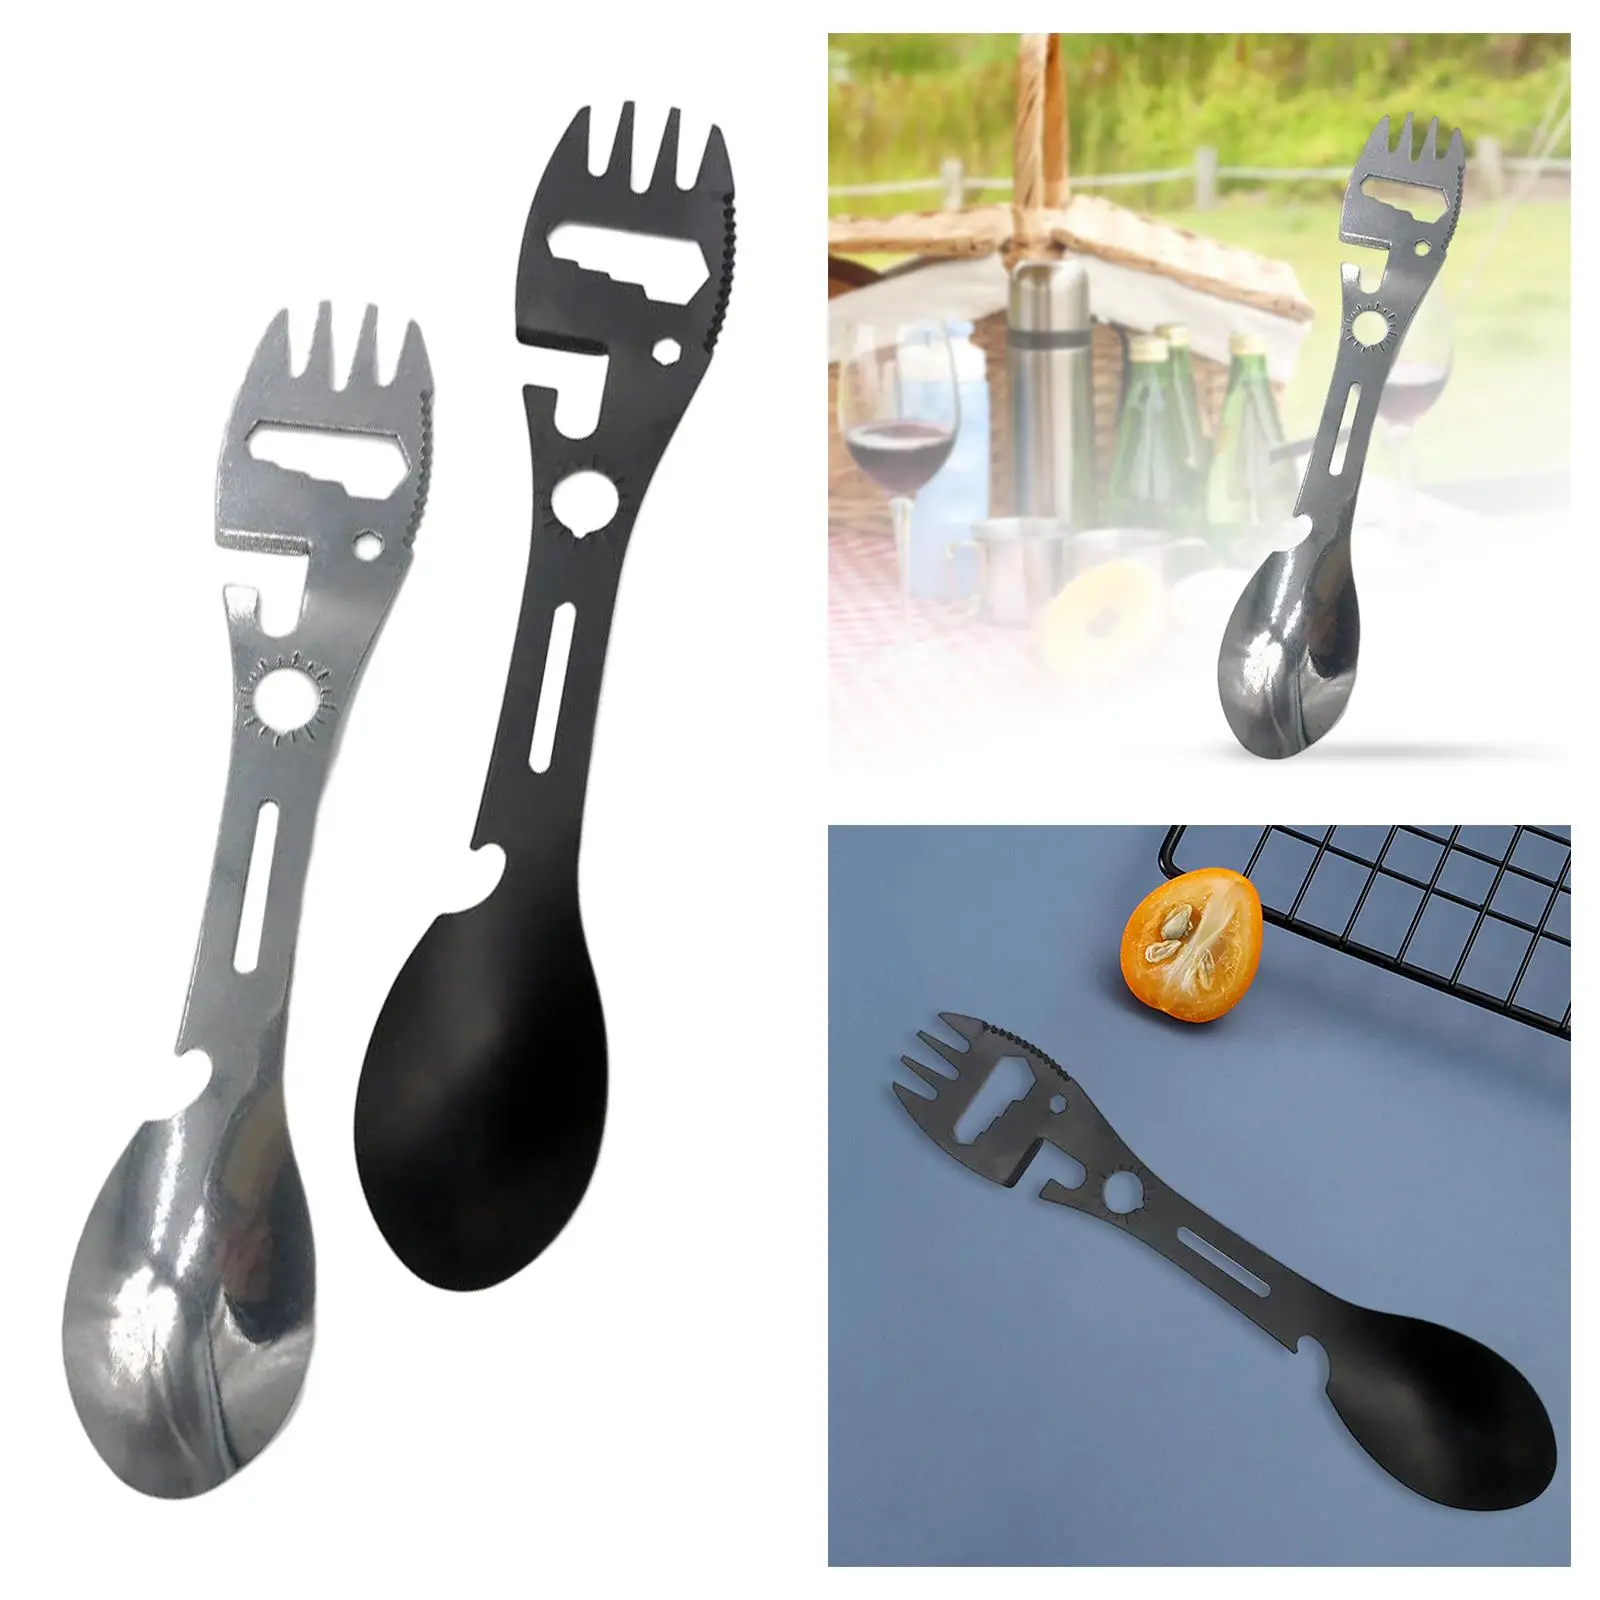 Portable Spork Fork Spoon Can Opener Dinnerware Stainless Steel Functional Tableware for Camping Travel Cooking Hiking Picnic